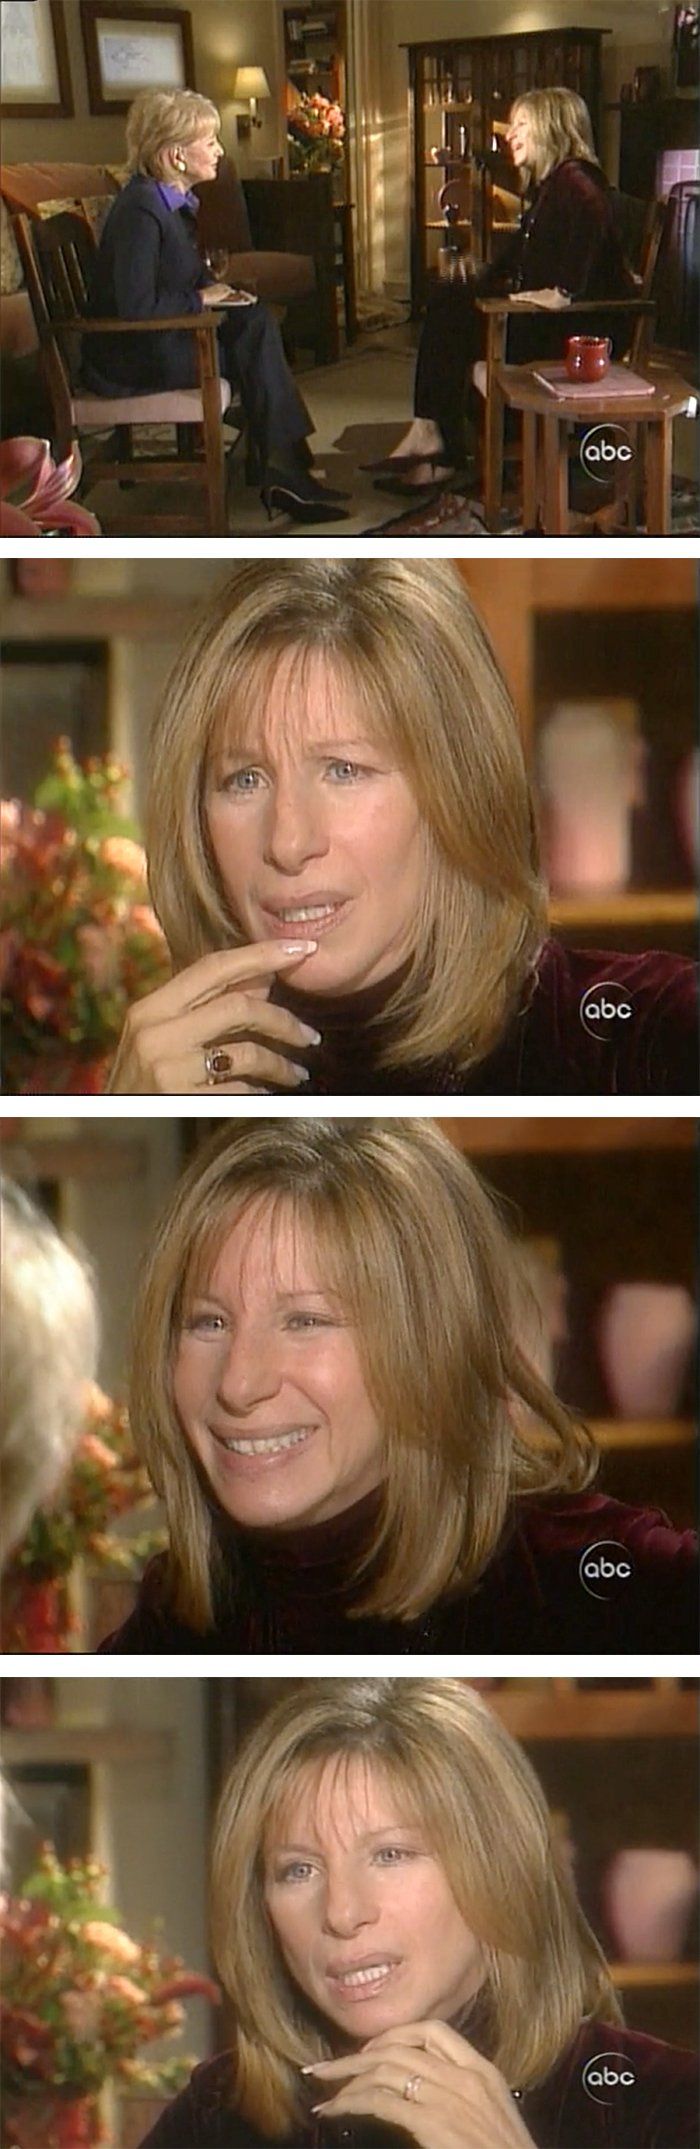 Scenes from Barbara Walters 2000 interview with Barbra Streisand.